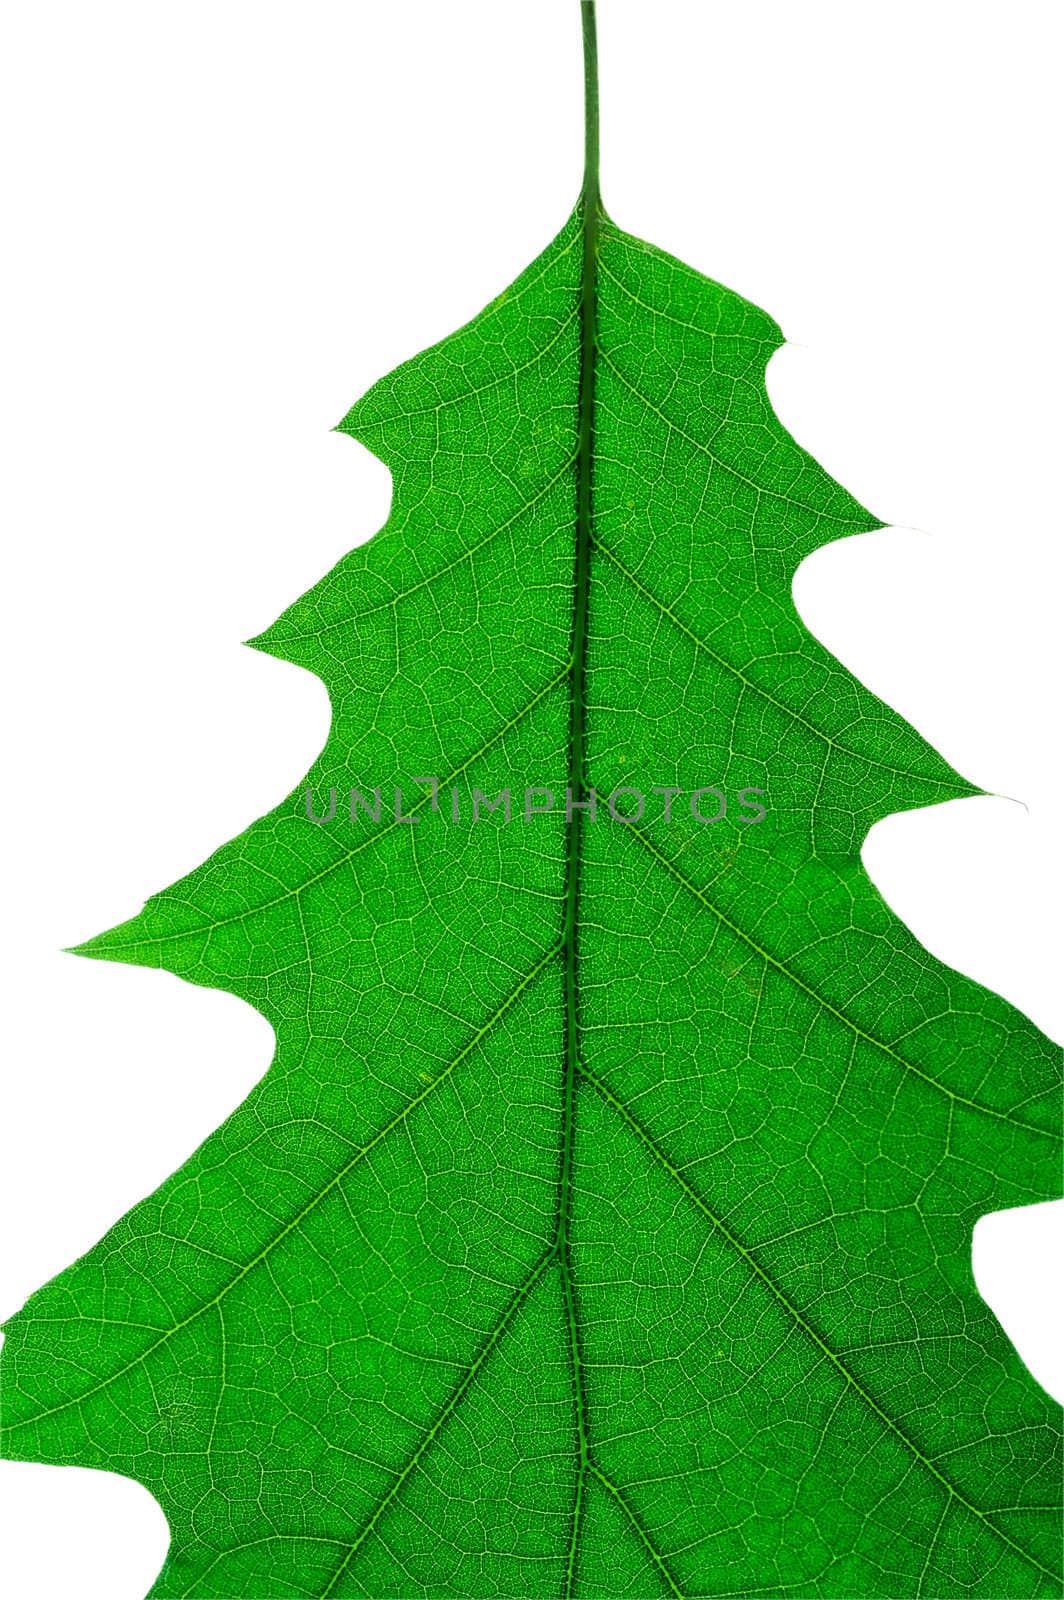 Oak leaf macro (2)) with clipping path by Laborer